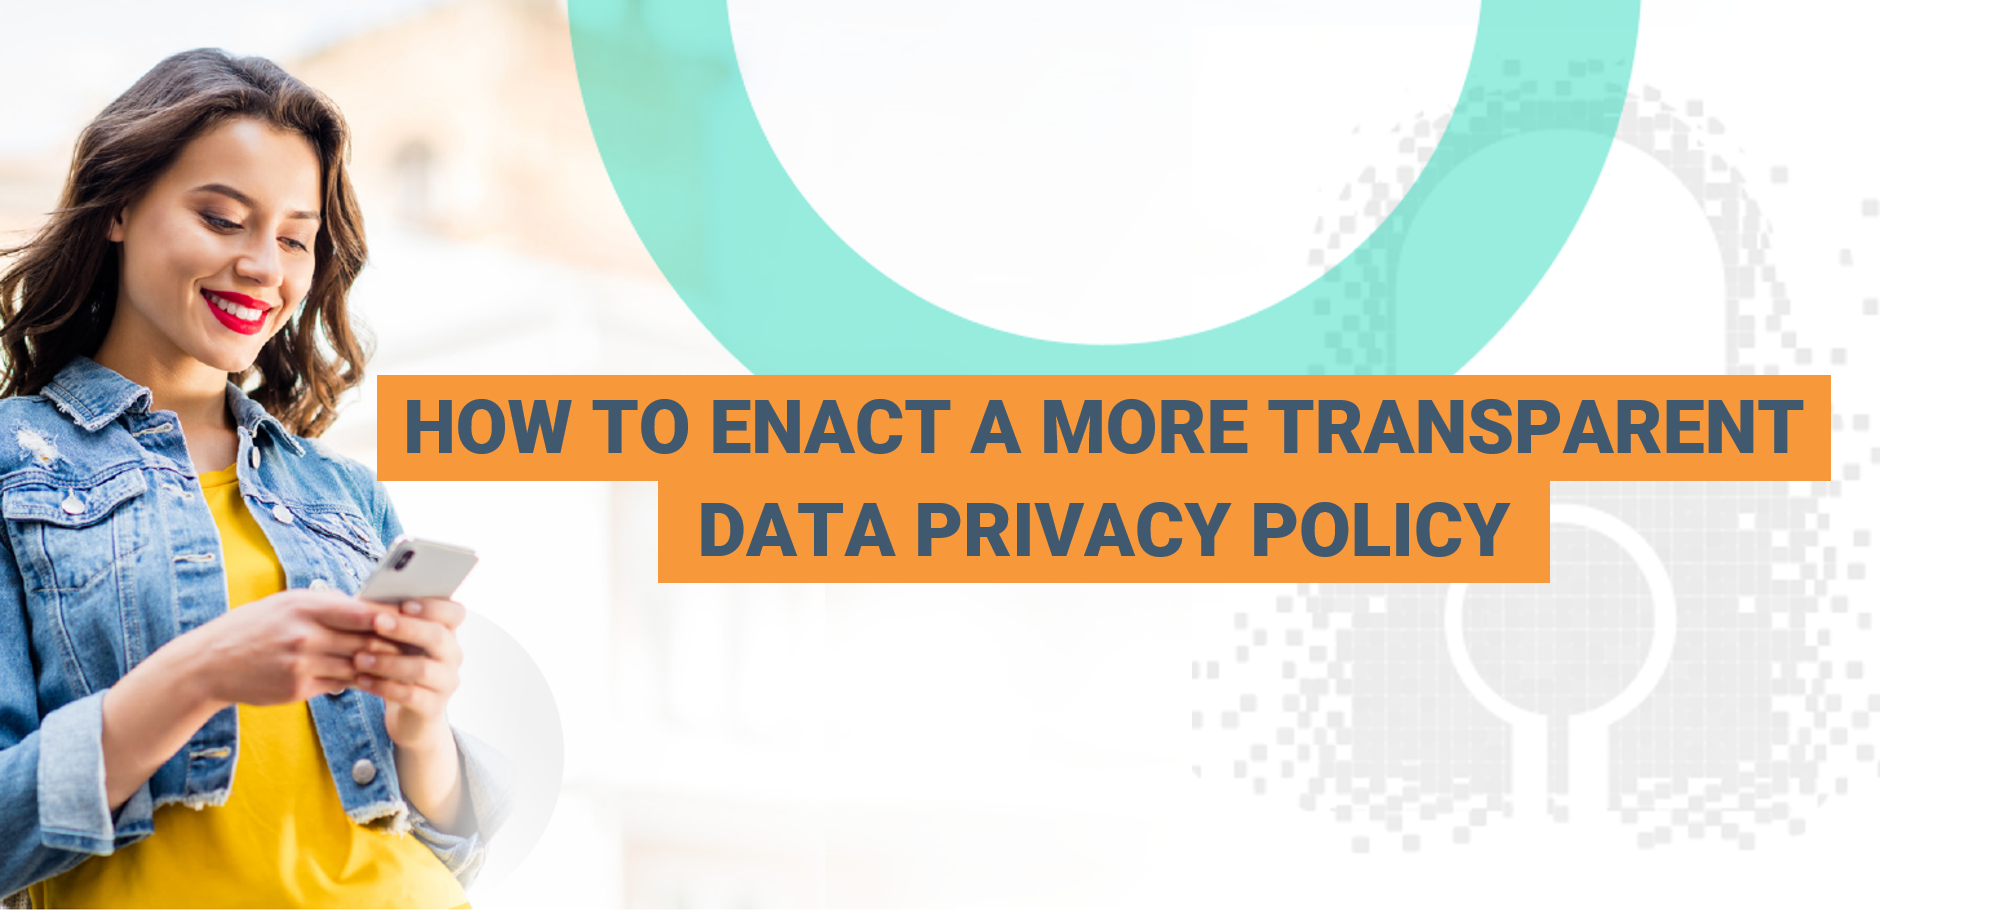 How to Enact a More Transparent Data Privacy Policy